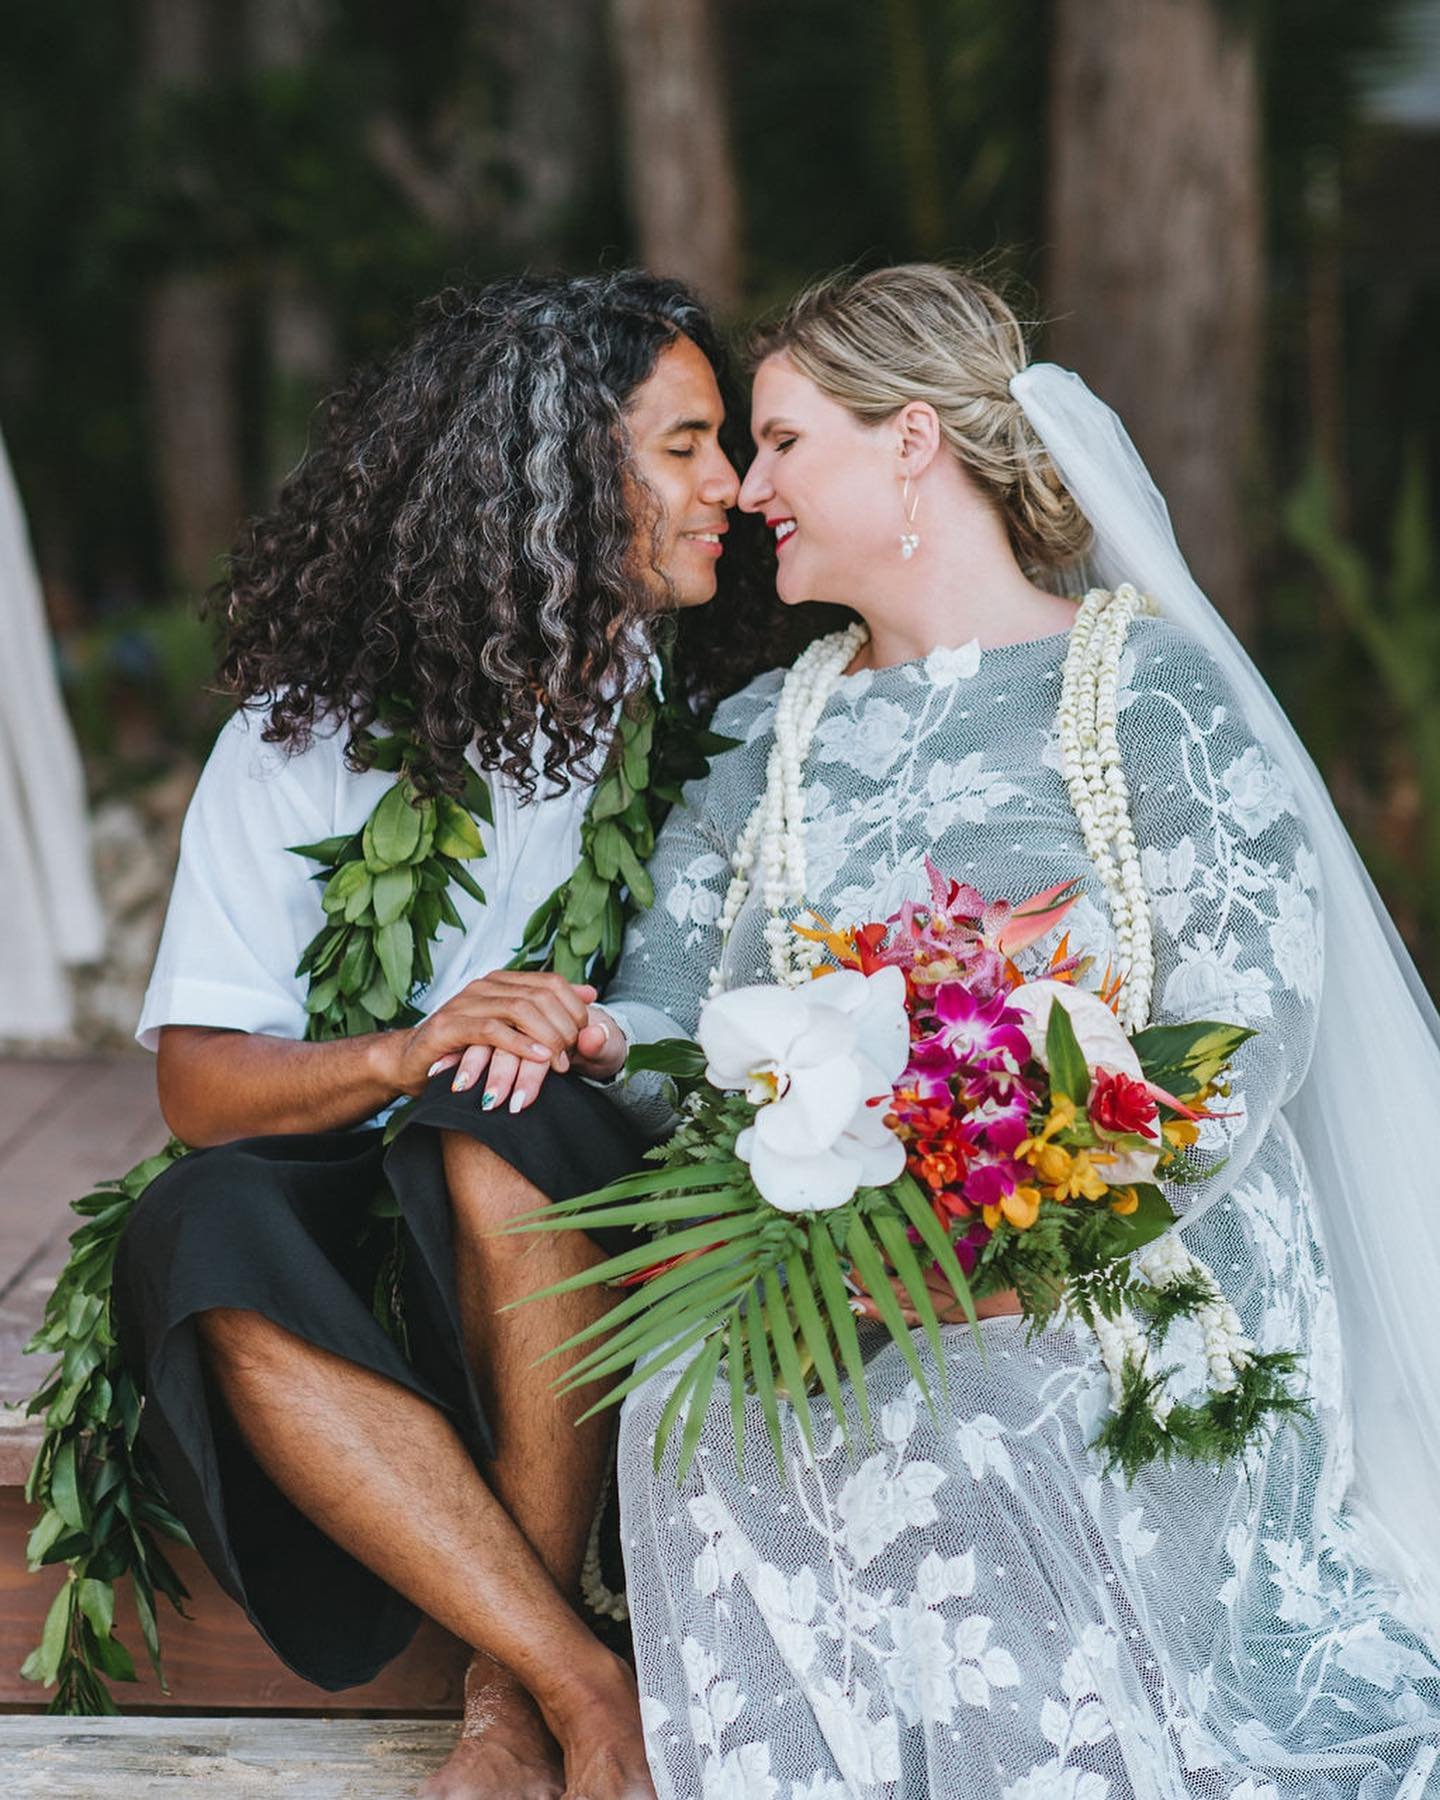 The beauty of eloping? Being able to be creative with so many elements of your day. Traditions are taking on new forms and we love to see it! Our Brides are bringing their own style to these intimate celebrations, and we&rsquo;re here for it. 
Are yo